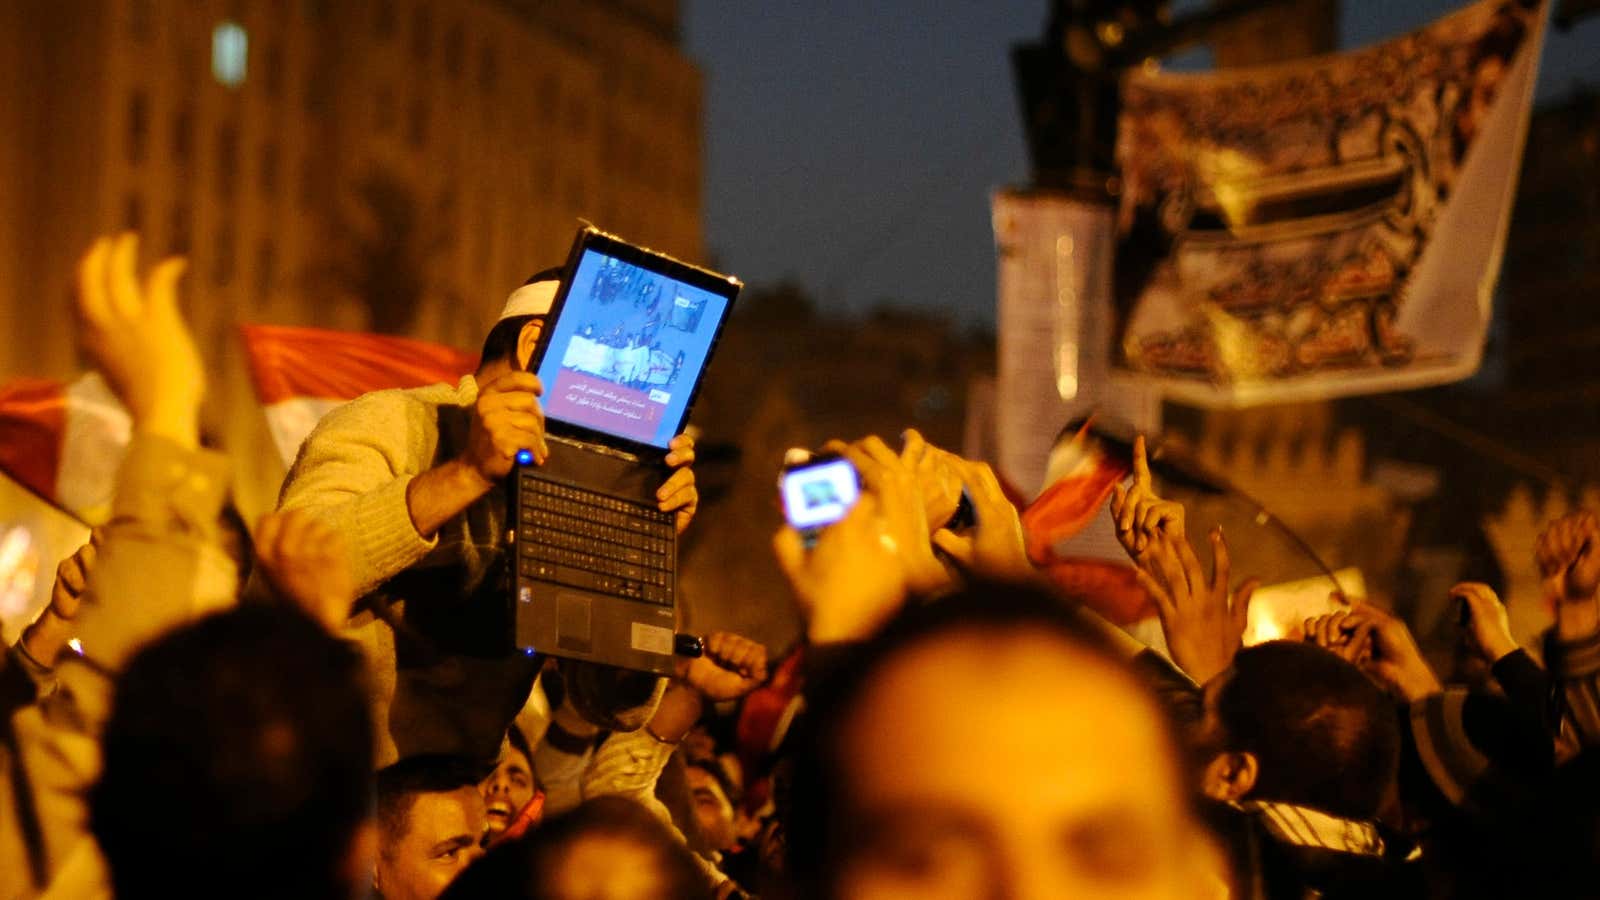 Technology played a major part in the uprisings in Egypt and other Arab countries.